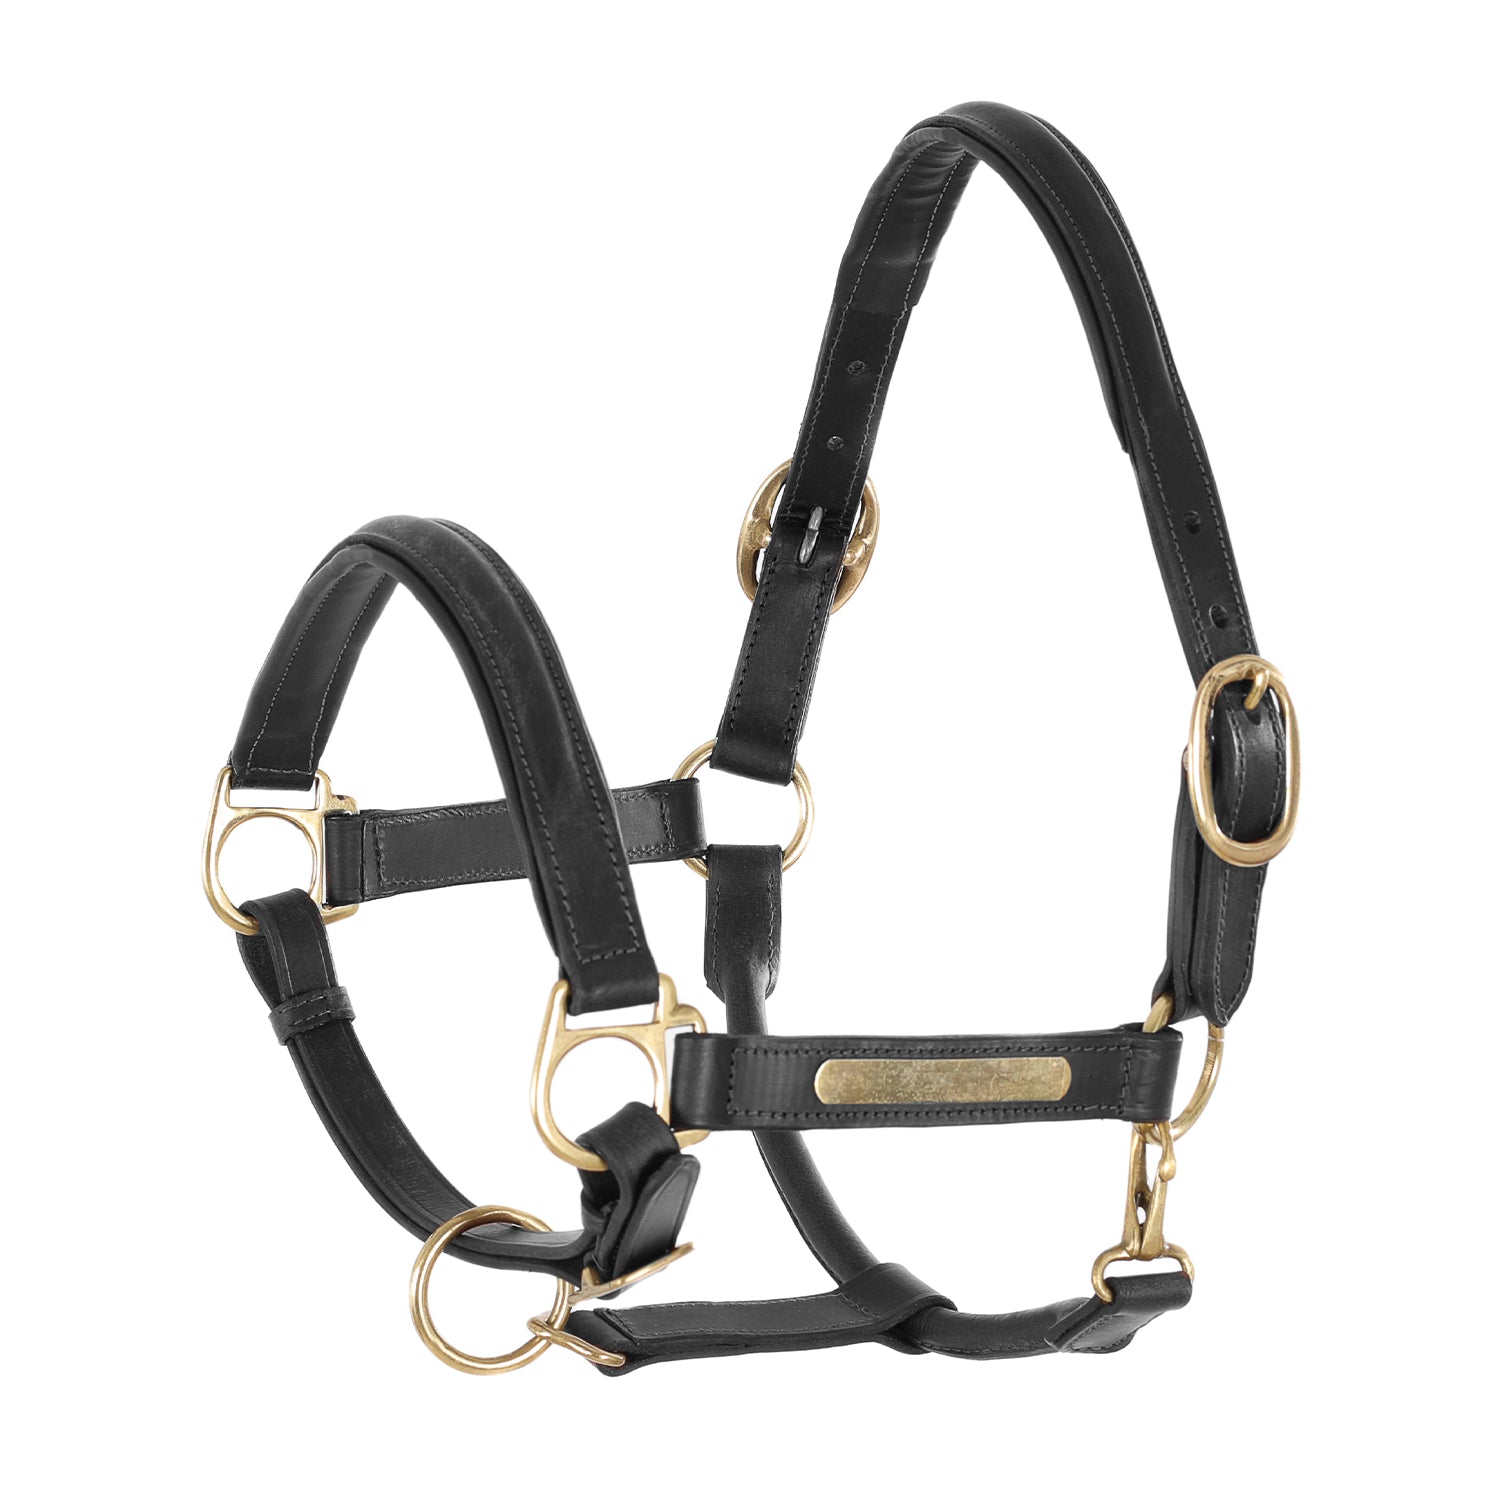 Leather Halter With Brass Nameplates- Umbria Equitazione